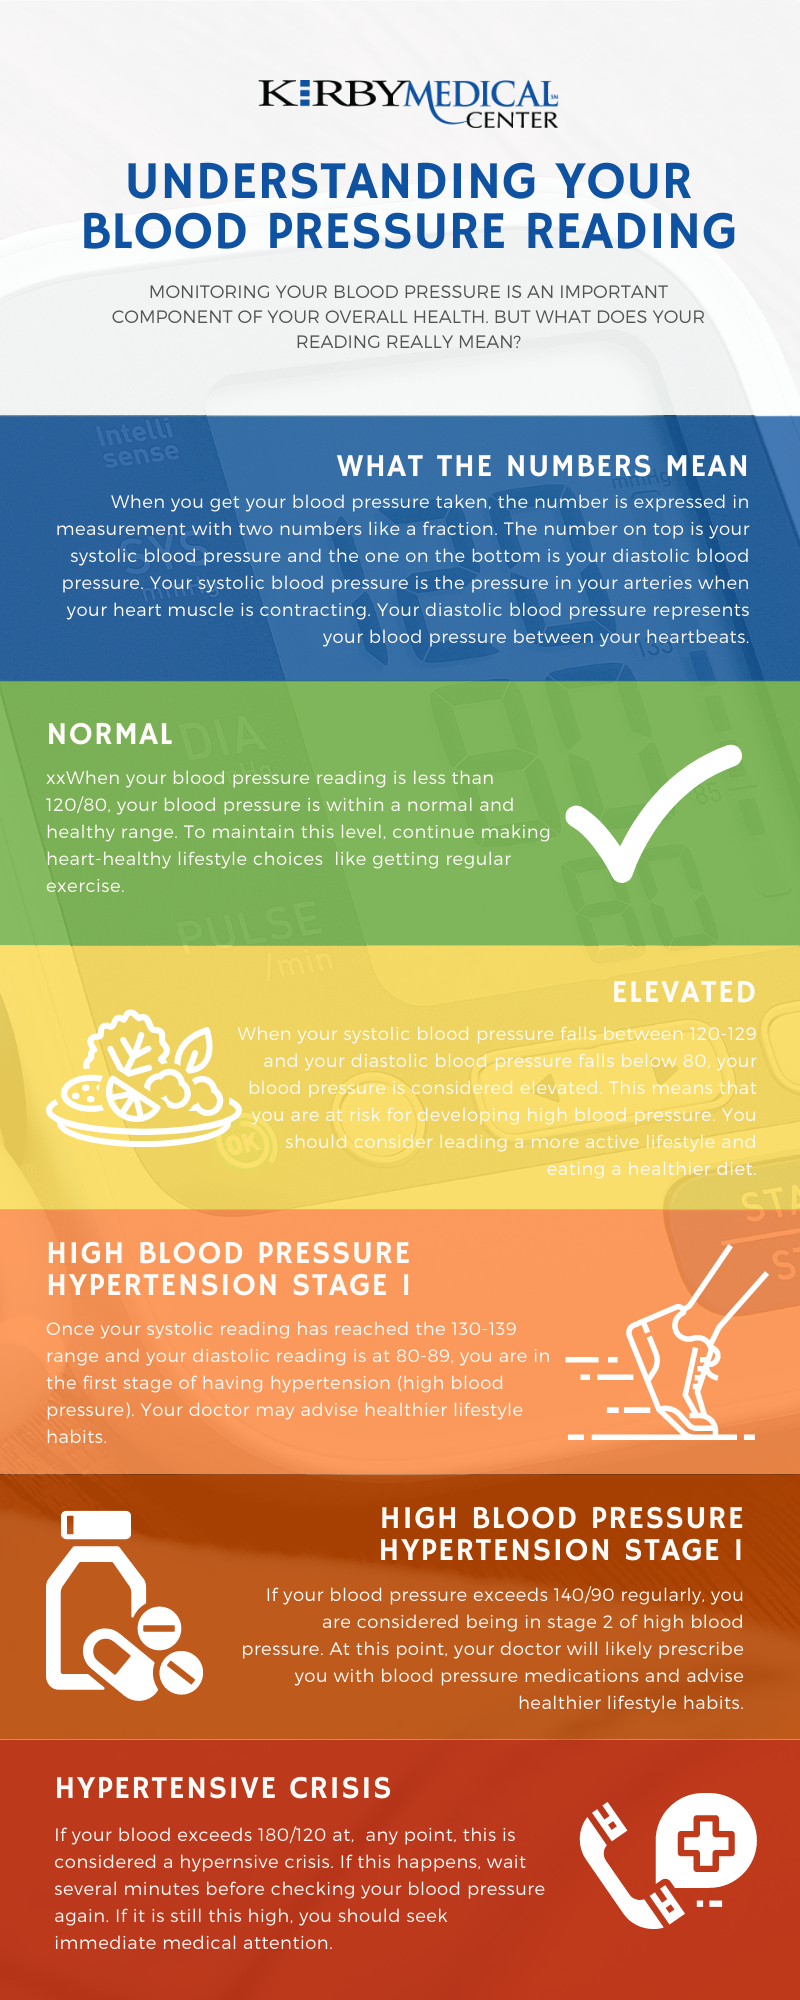 What Is The Standard Reading For Blood Pressure